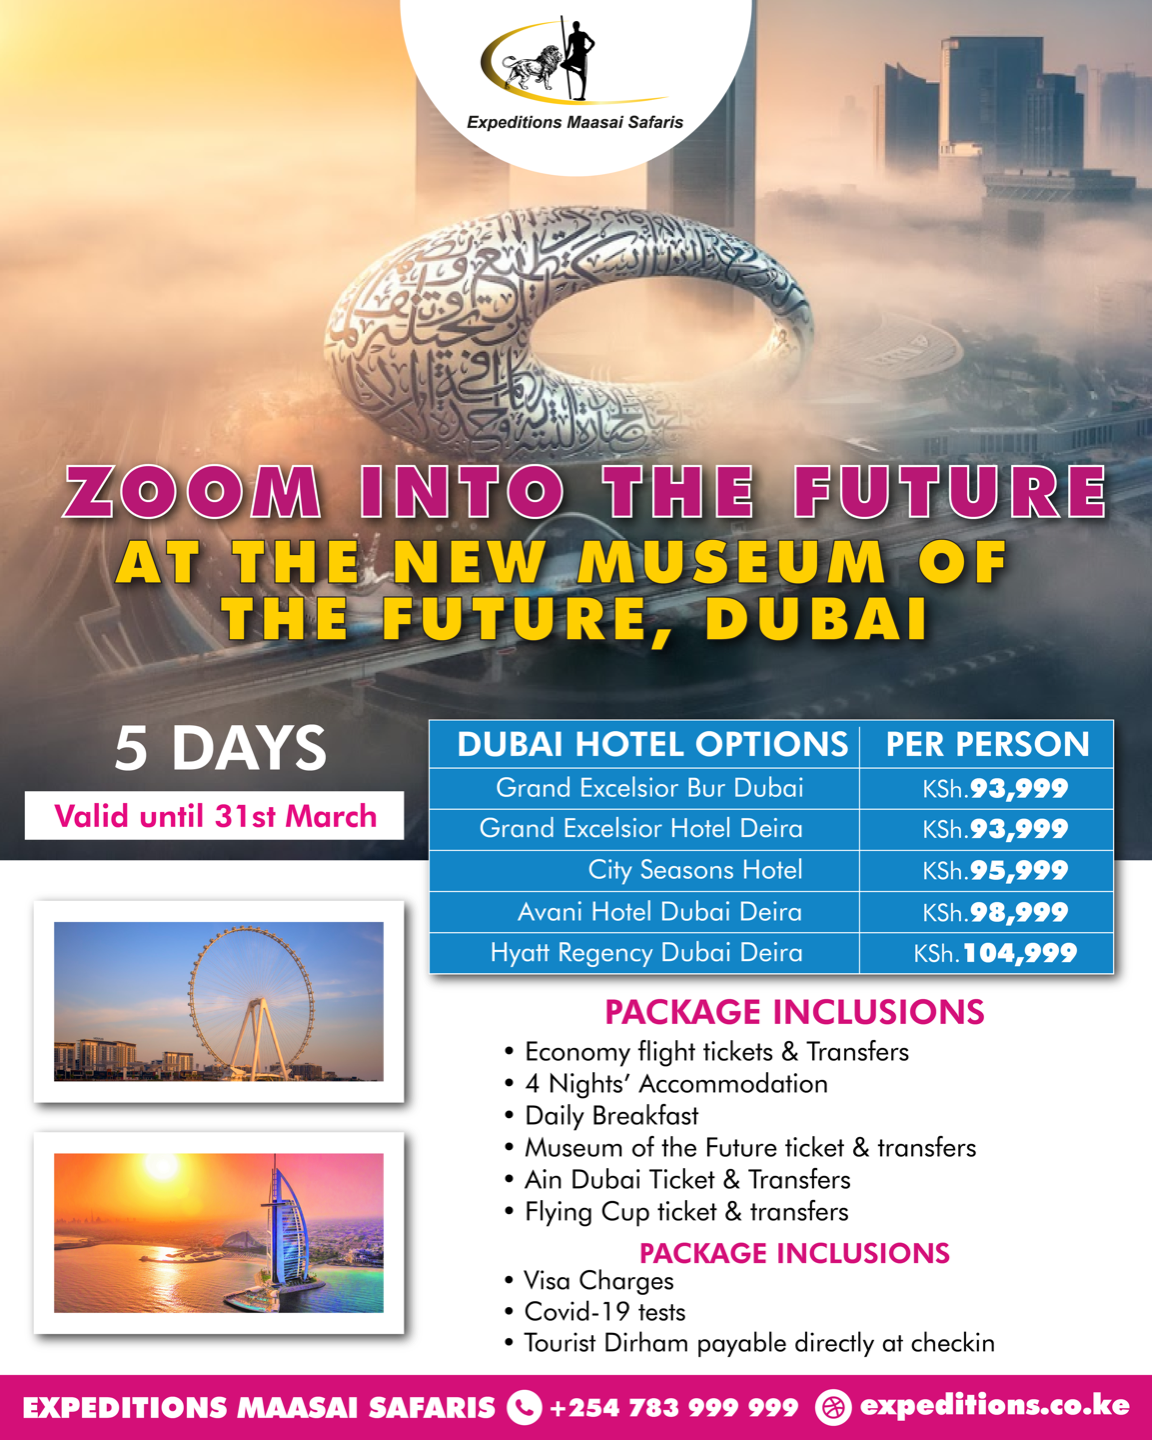 Our 5 Days, 4 Nights Dubai tour packages will take you to new Museum of the Future in Dubai.